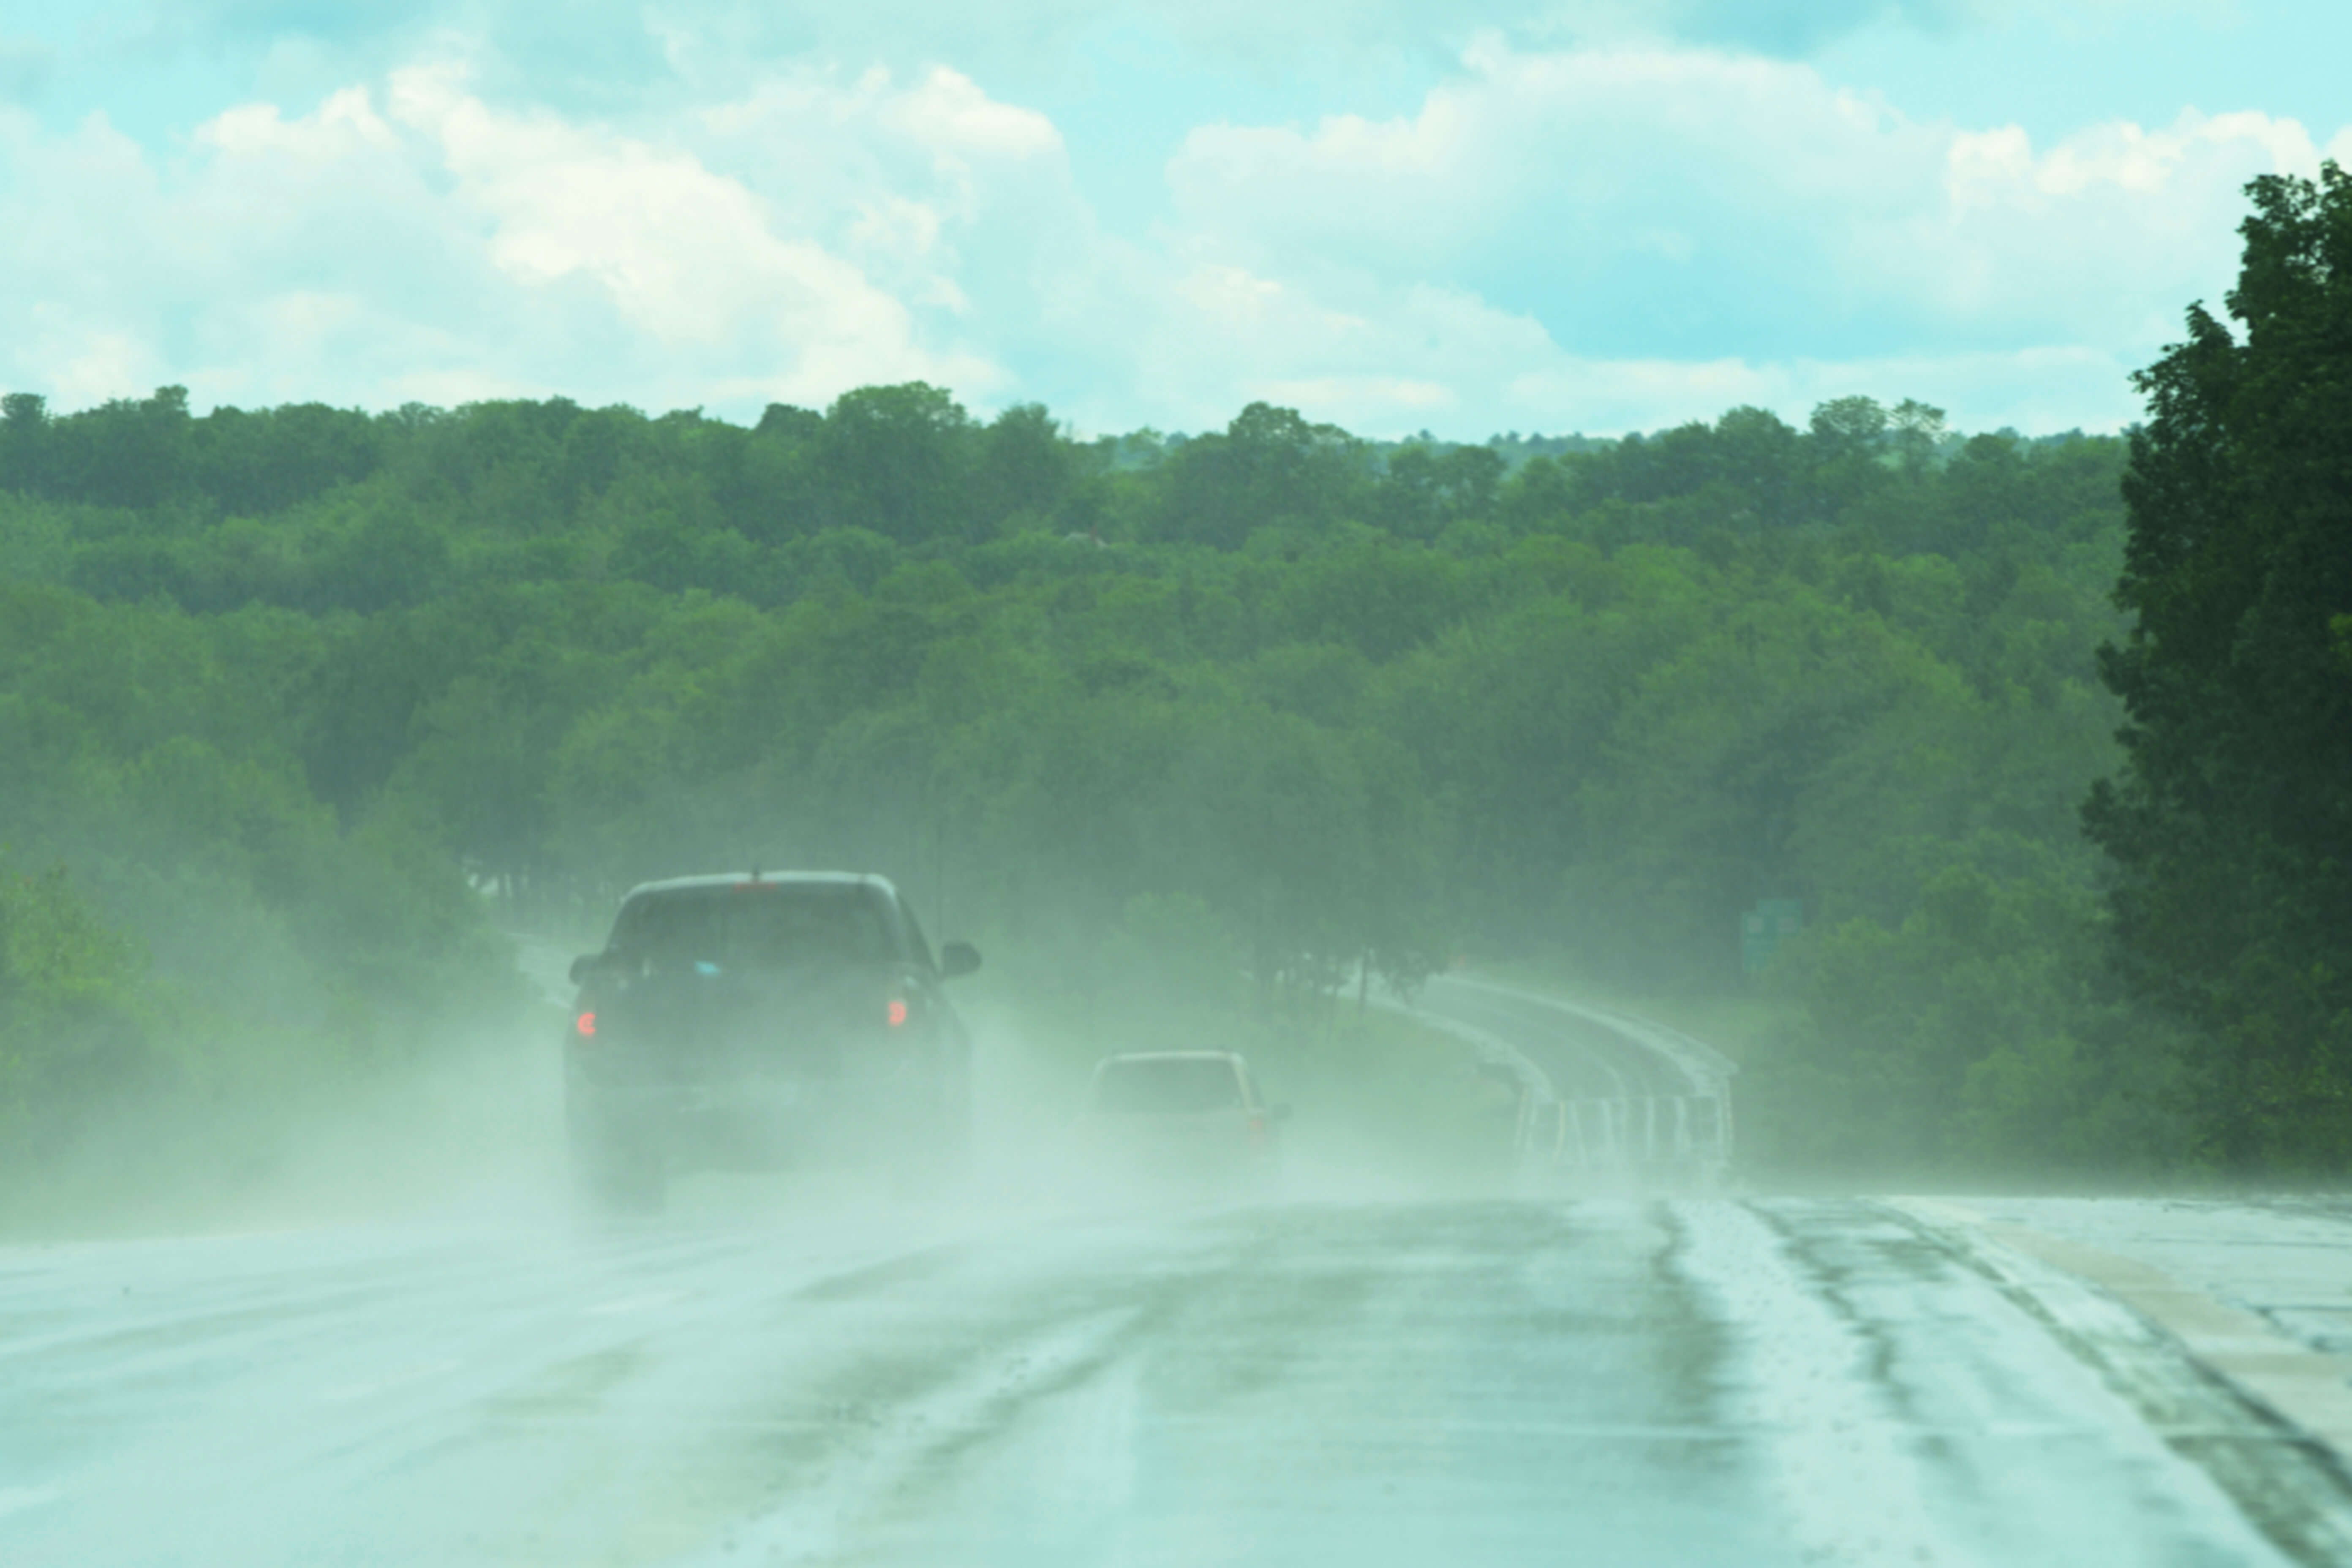 Cars hydroplaning on a highway.